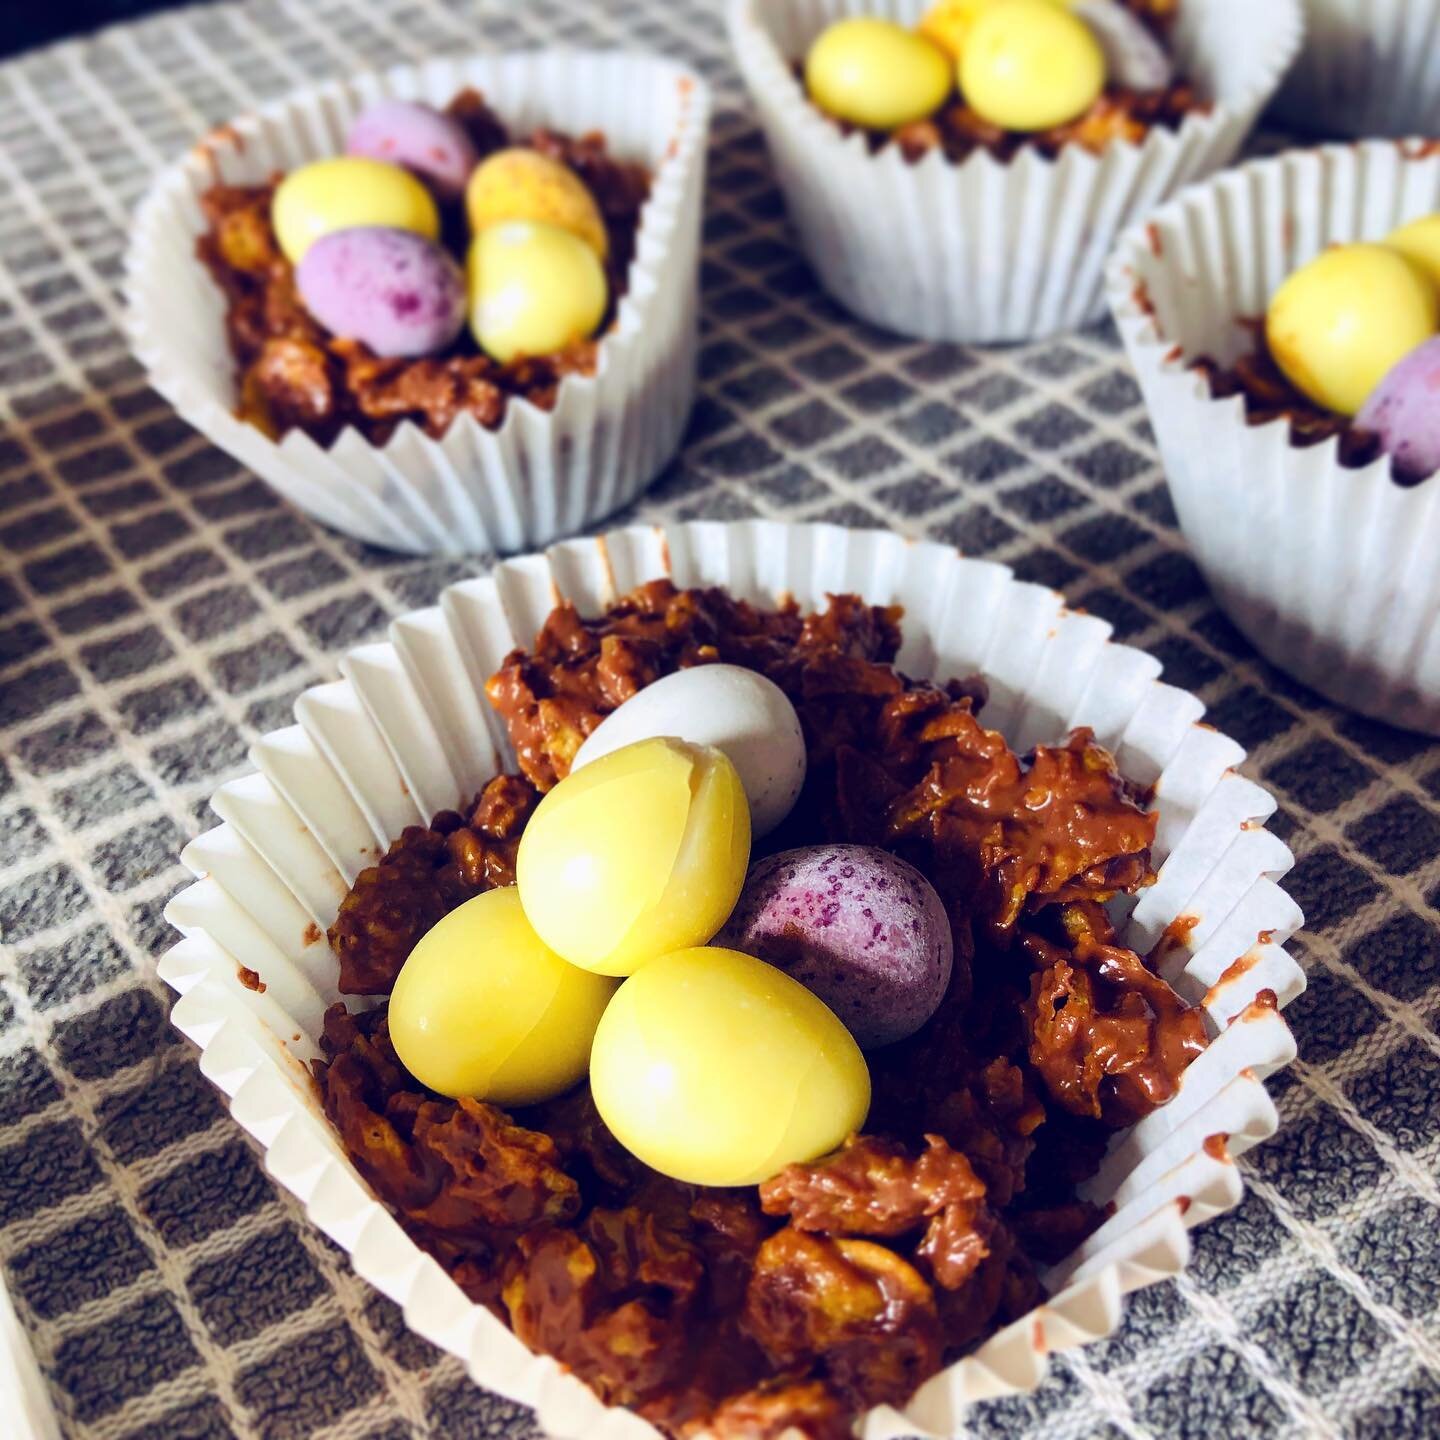 As Easter is just around the corner why not use your time in isolation to get some baking done! 🐣 
225g/8oz plain chocolate, broken into pieces
2 tbsp golden syrup
50g/2oz butter
75g/2&frac34;oz cornflakes
36 mini chocolate eggs

1)Melt the chocolat